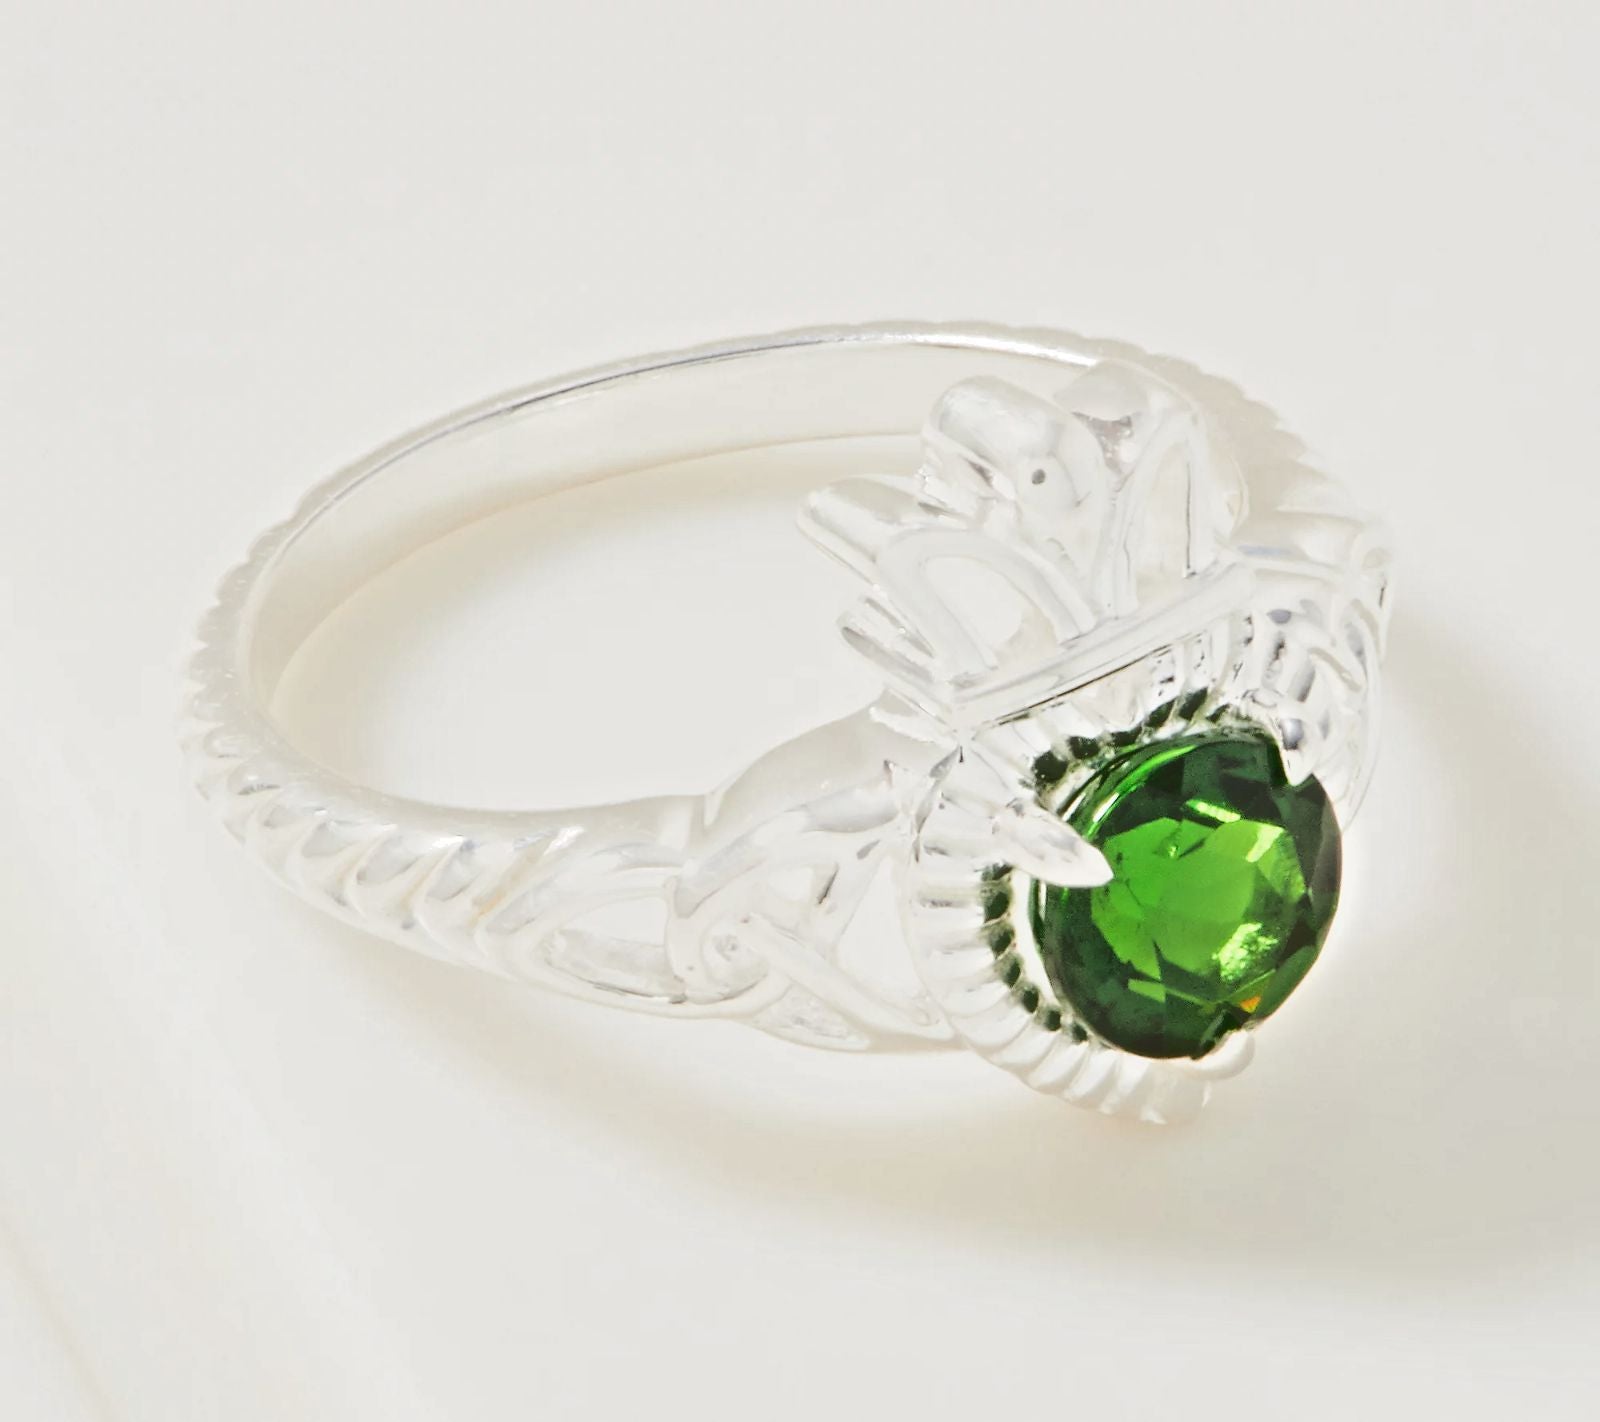 JMH Jewellery Sterling Silver & Chrome Diopside Claddagh Ring. Size 9